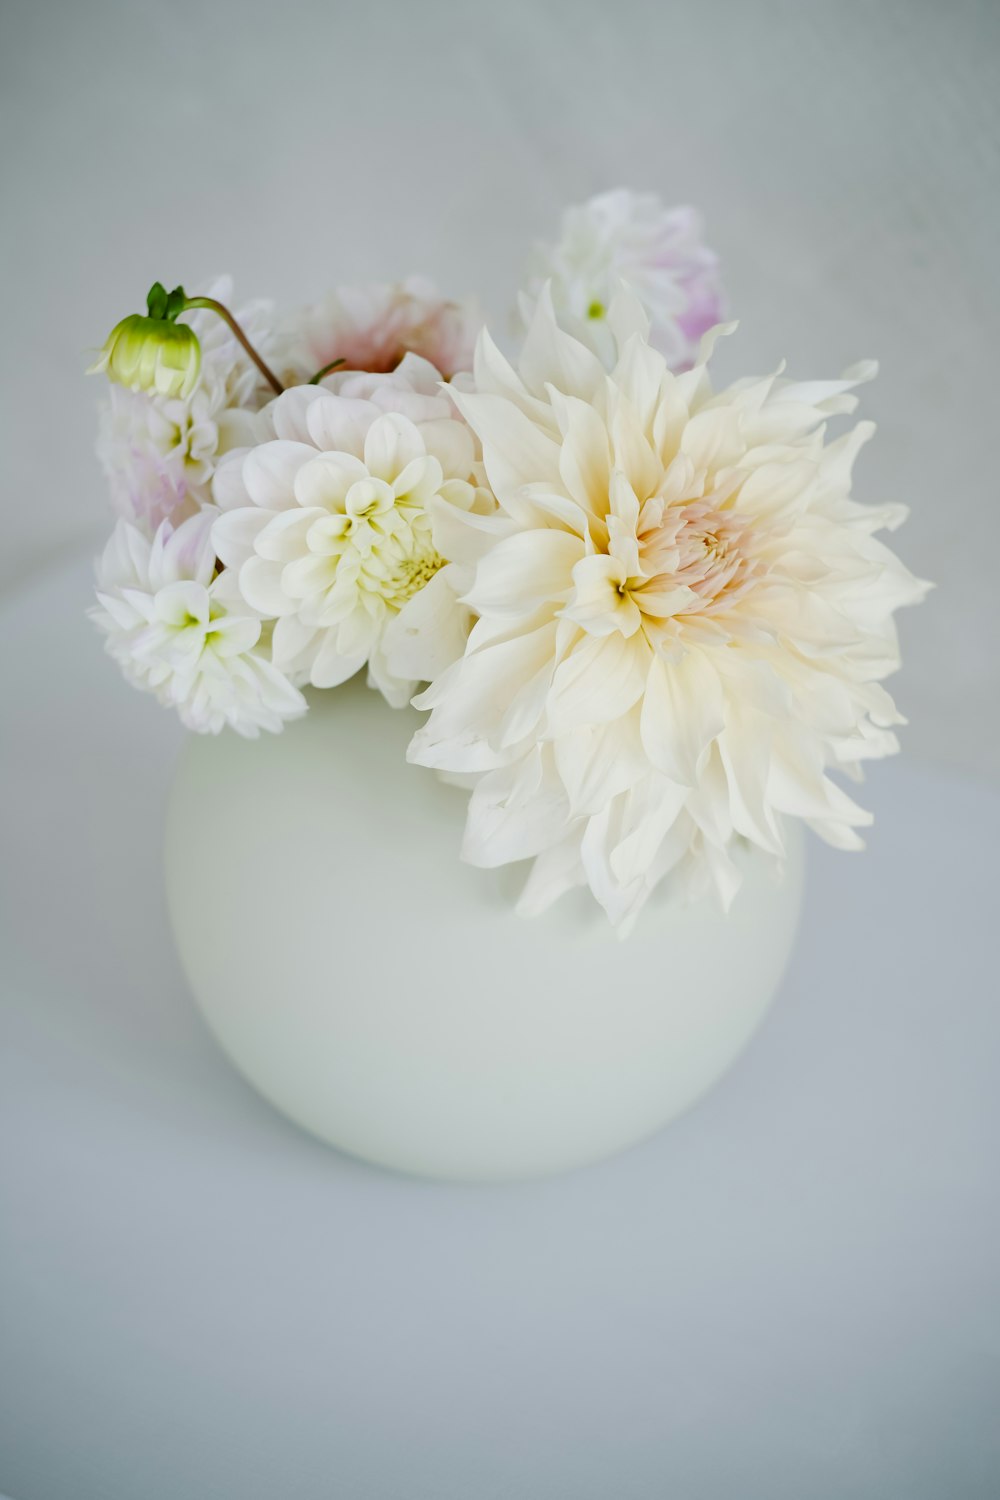 a white vase filled with white and pink flowers